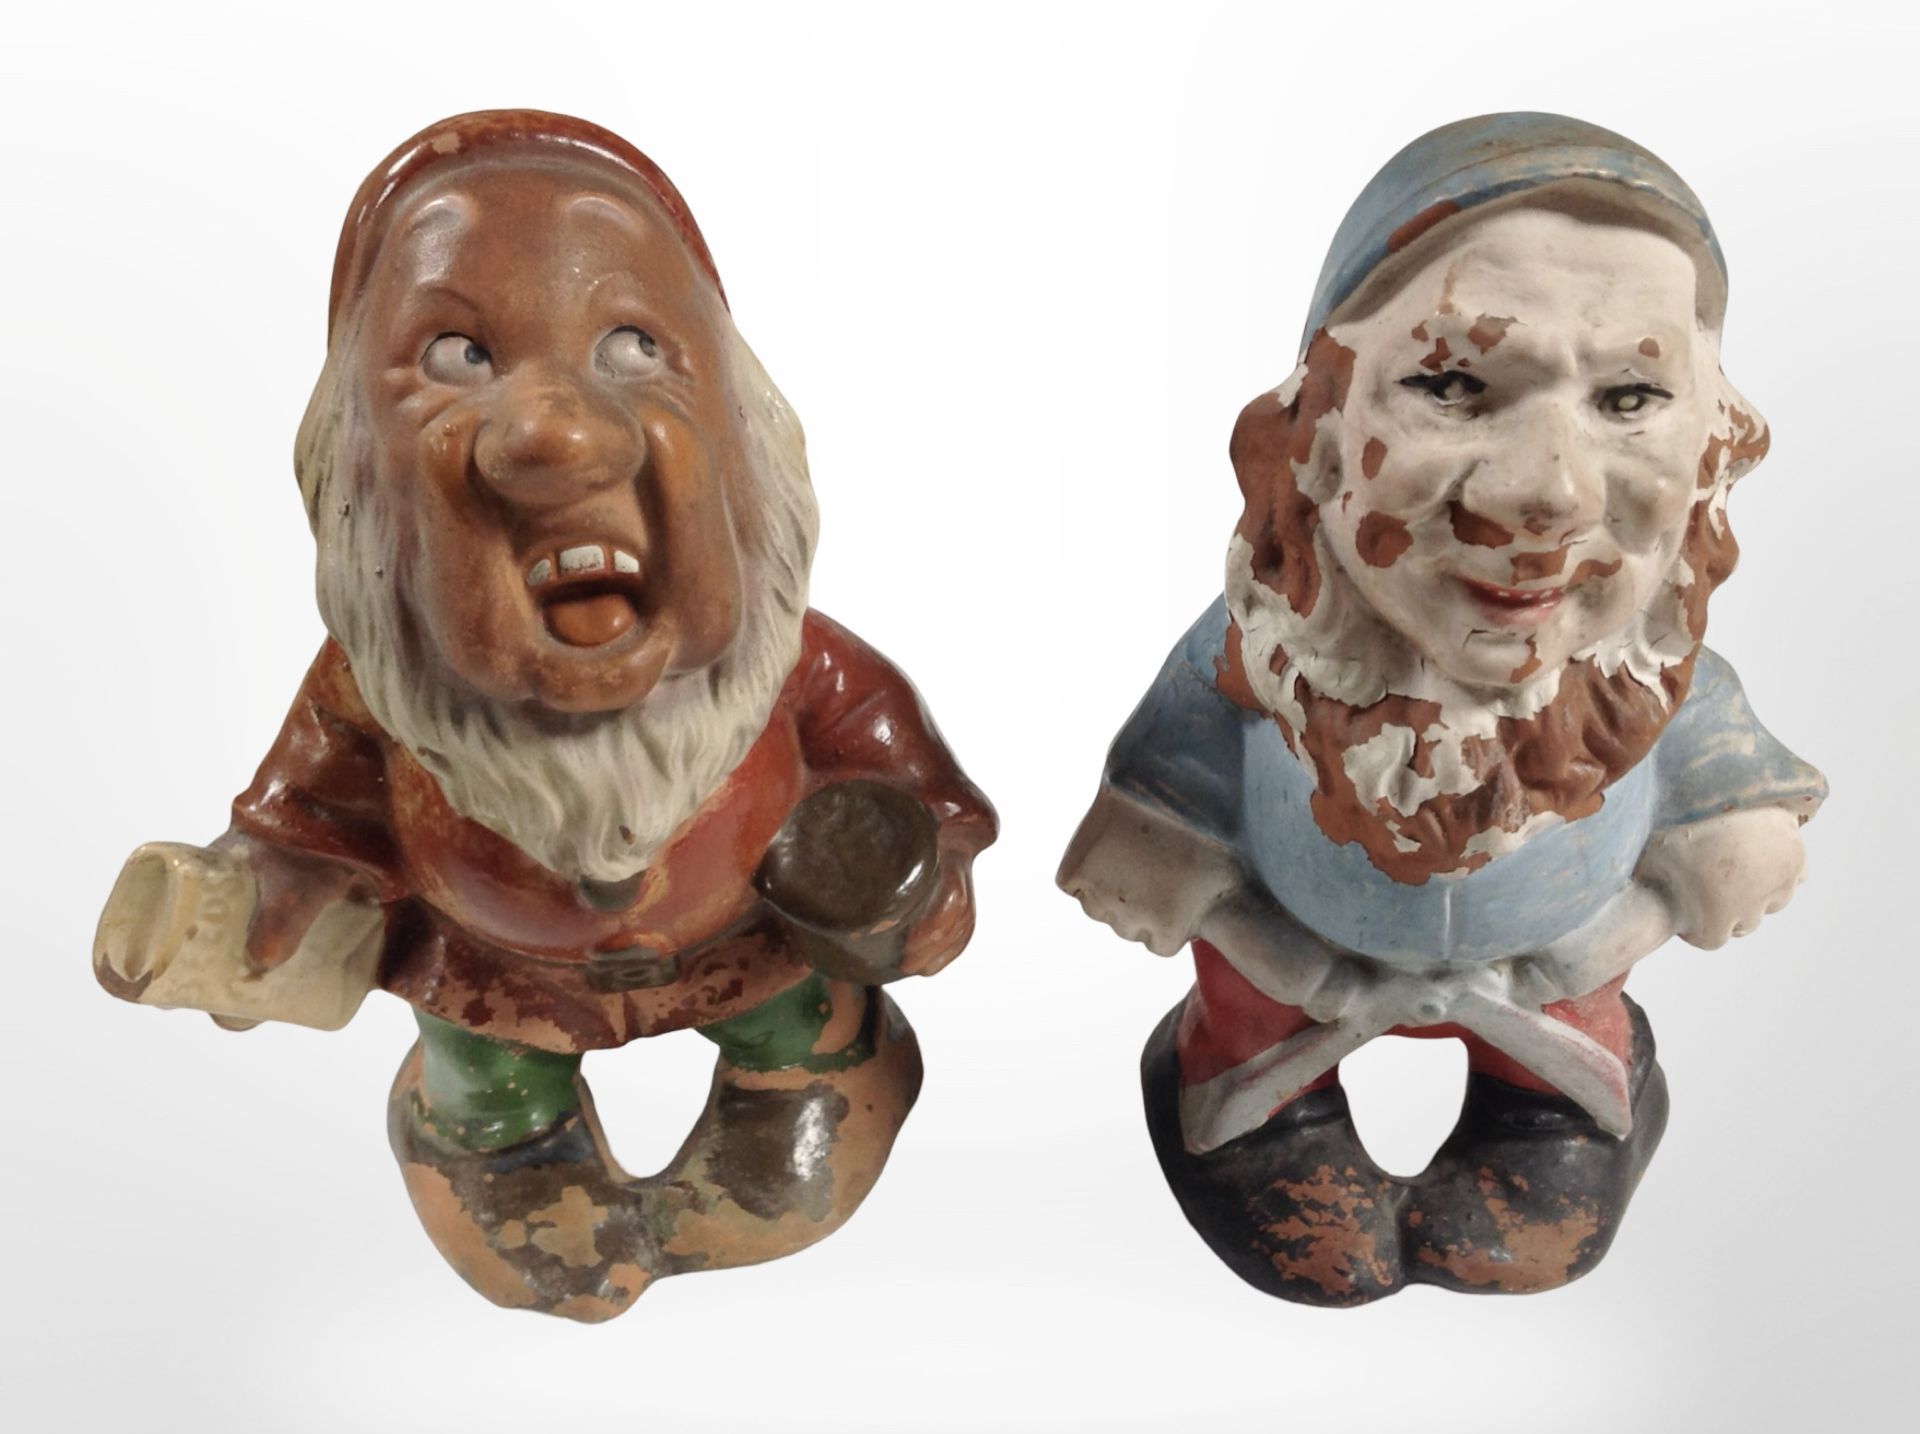 Two vintage painted terracotta figures of dwarves from Snow White, height 15cm.